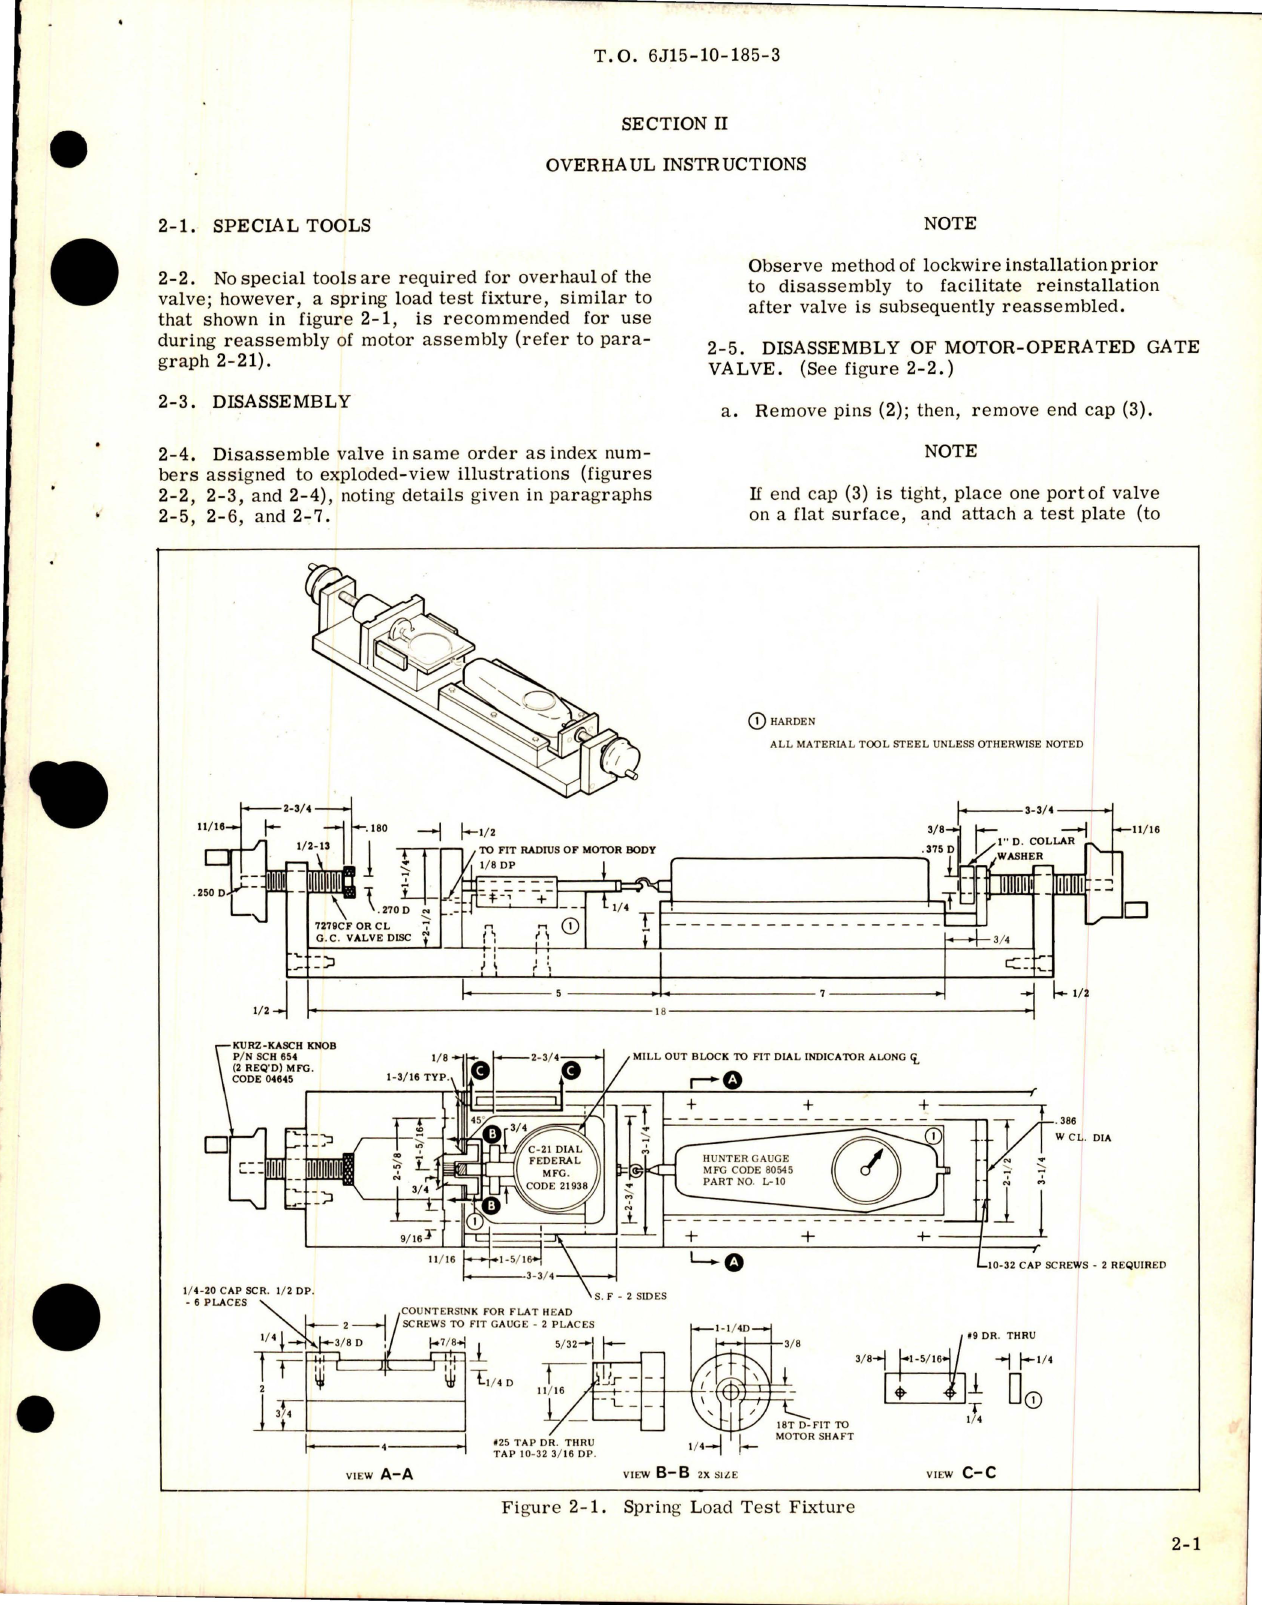 Sample page 7 from AirCorps Library document: Overhaul Instructions for Motor Operated Gate Valve - Parts AV16B1674B and AV16B1760B 